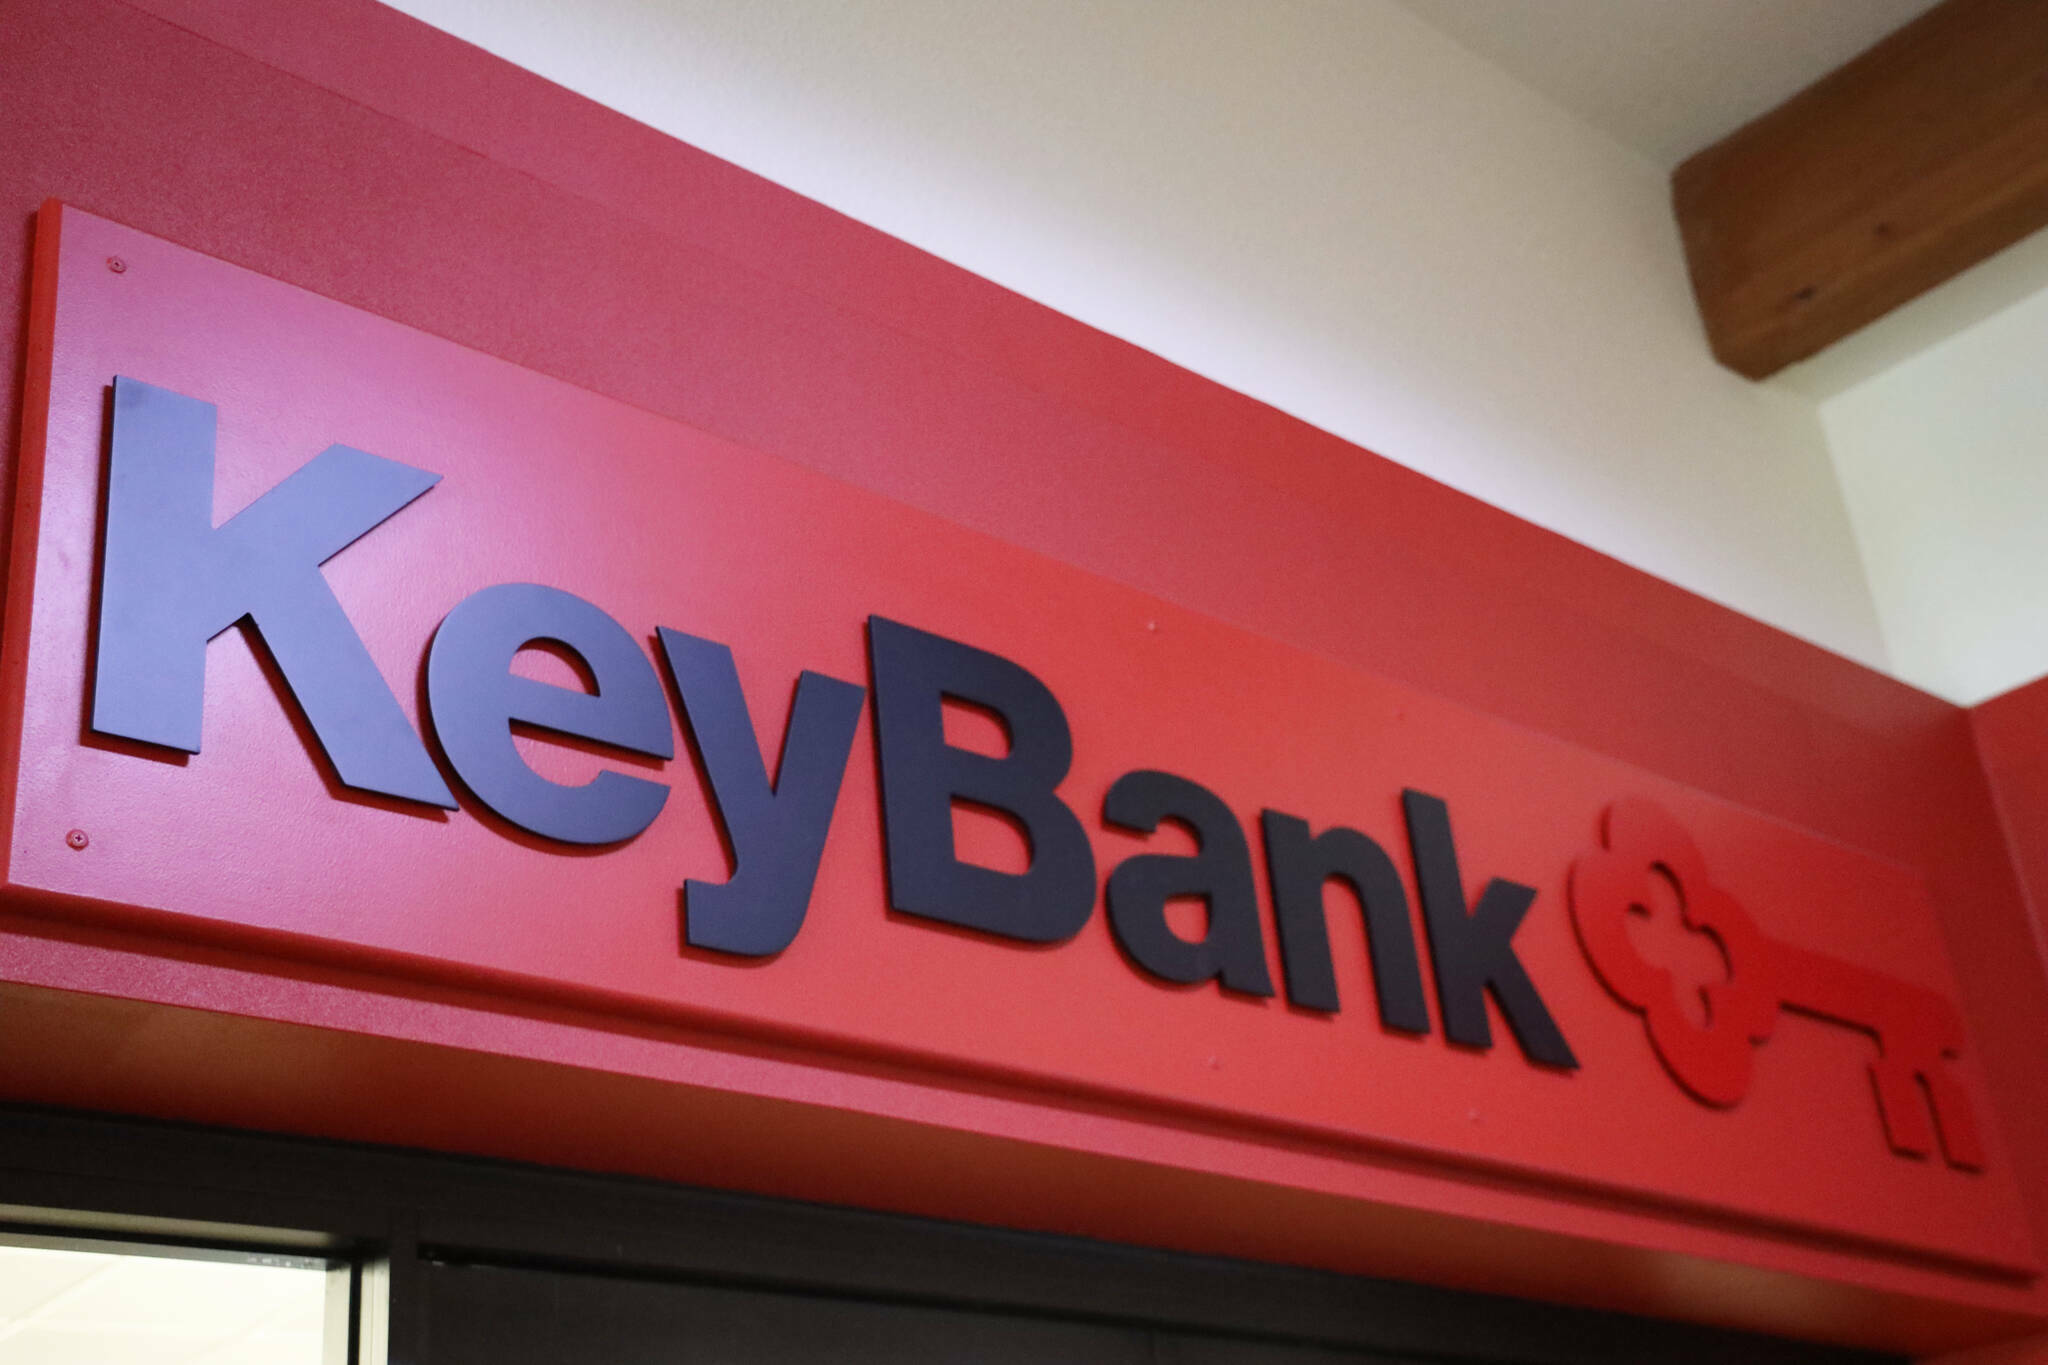 Key Bank was one of the banks victimized by a Juneau man who was sentenced Tuesday to two-and-a-half years in prison for stealing nearly $580,000 multiple banks and credit unions between 2020 and 2022. (Clarise Larson / Juneau Empire file photo)